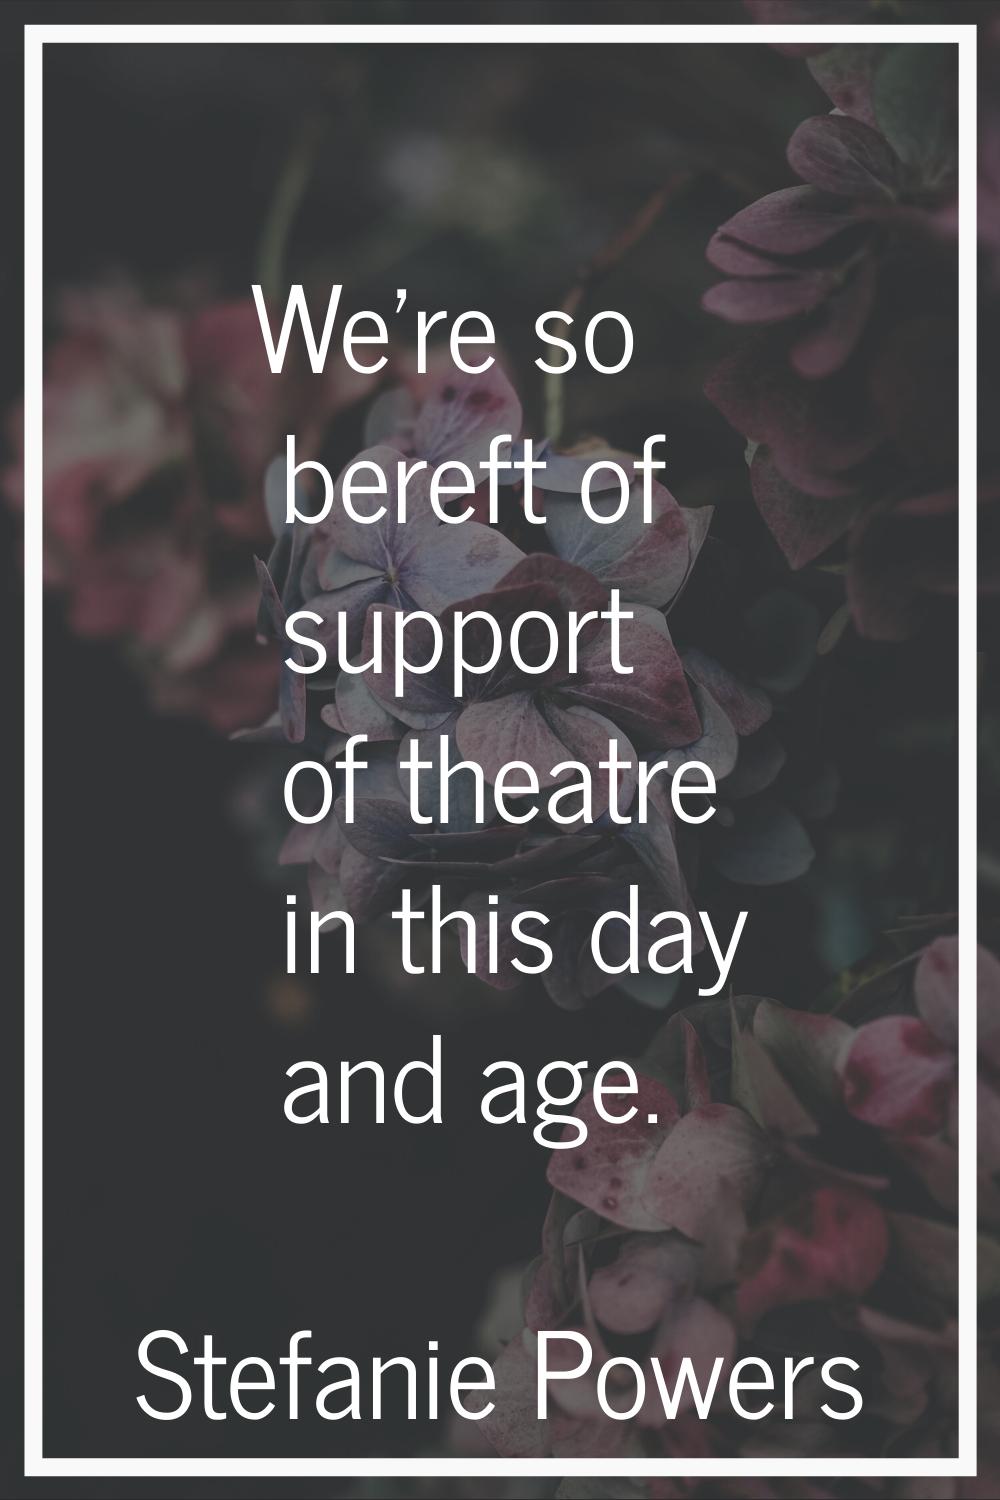 We're so bereft of support of theatre in this day and age.